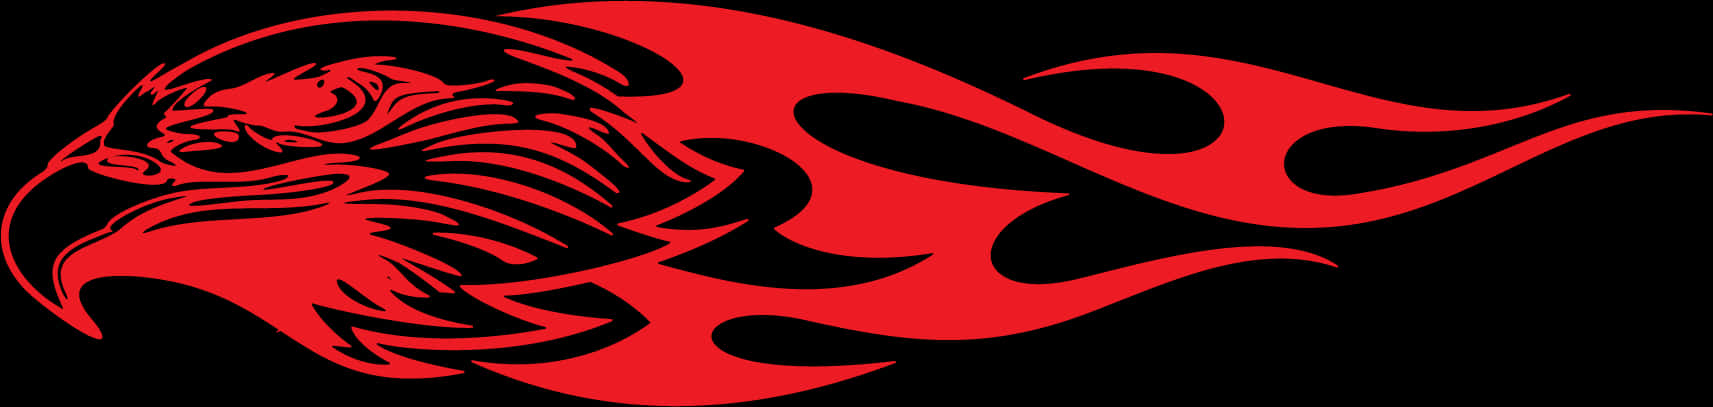 Red Eagle Flame Graphic PNG